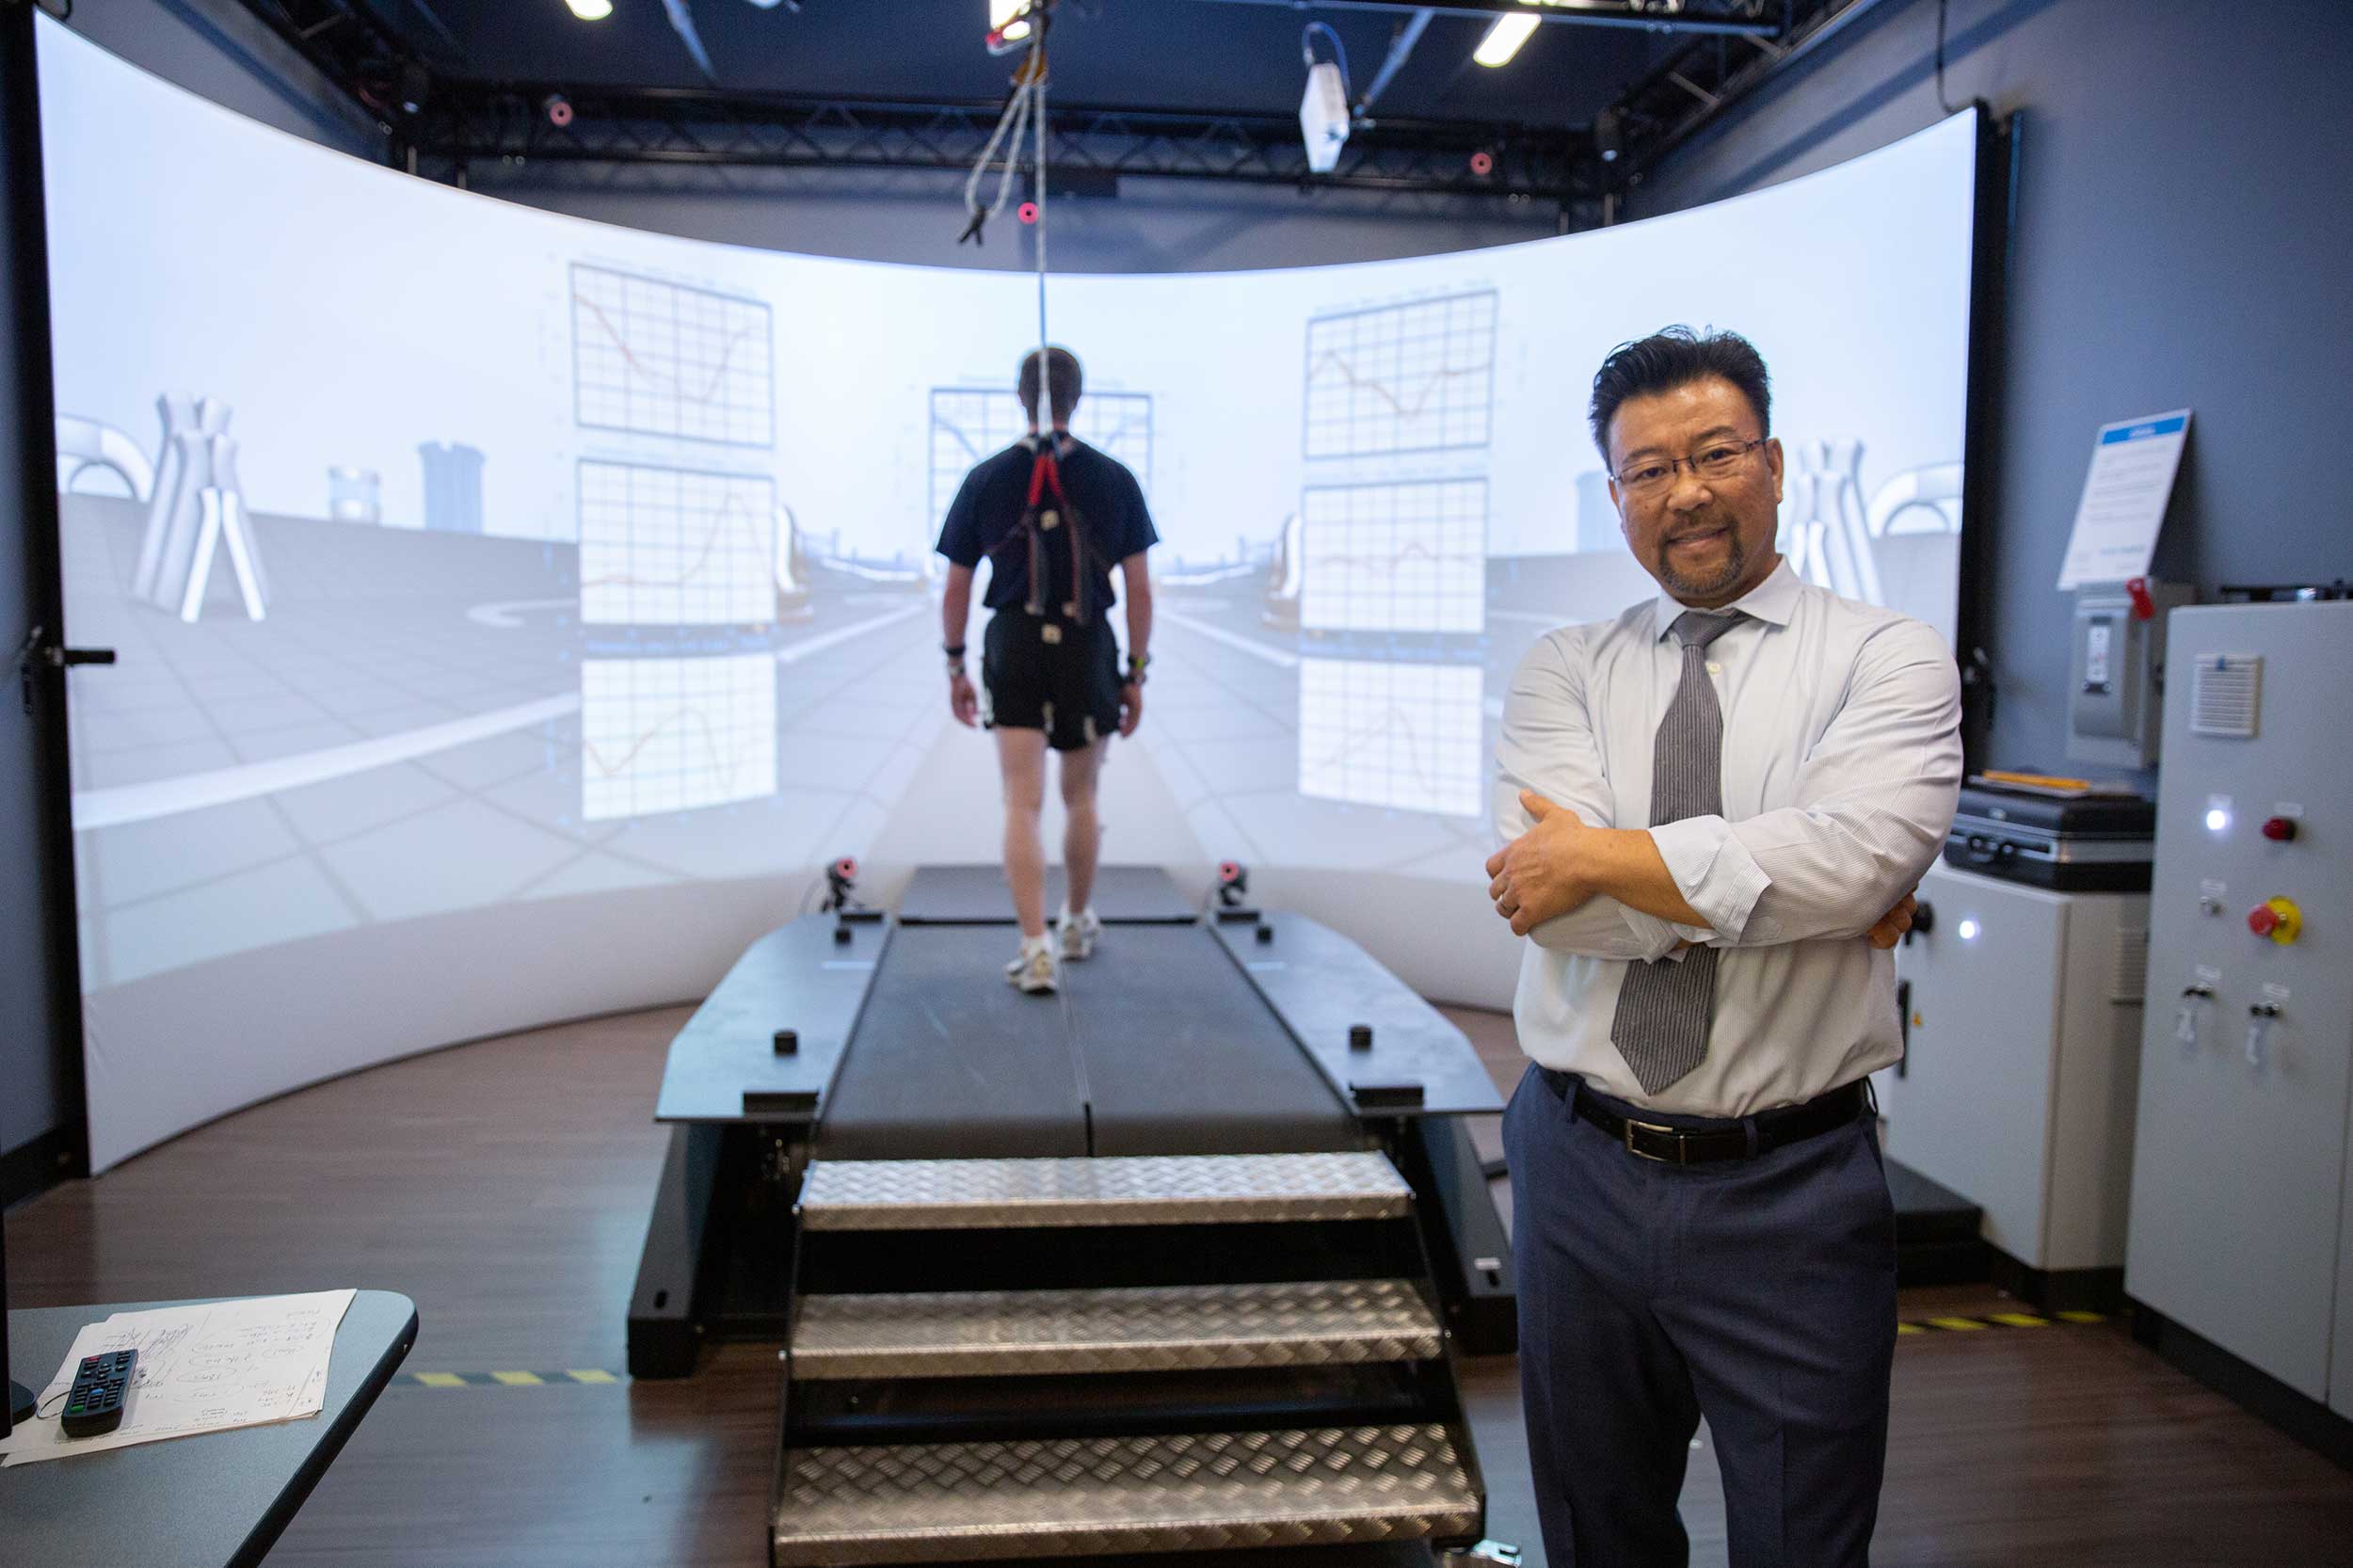 Thurman Lockhart stands in his mobility lab, while a person walks on a specialized treadmill connected to a digital apparatus walks in the background